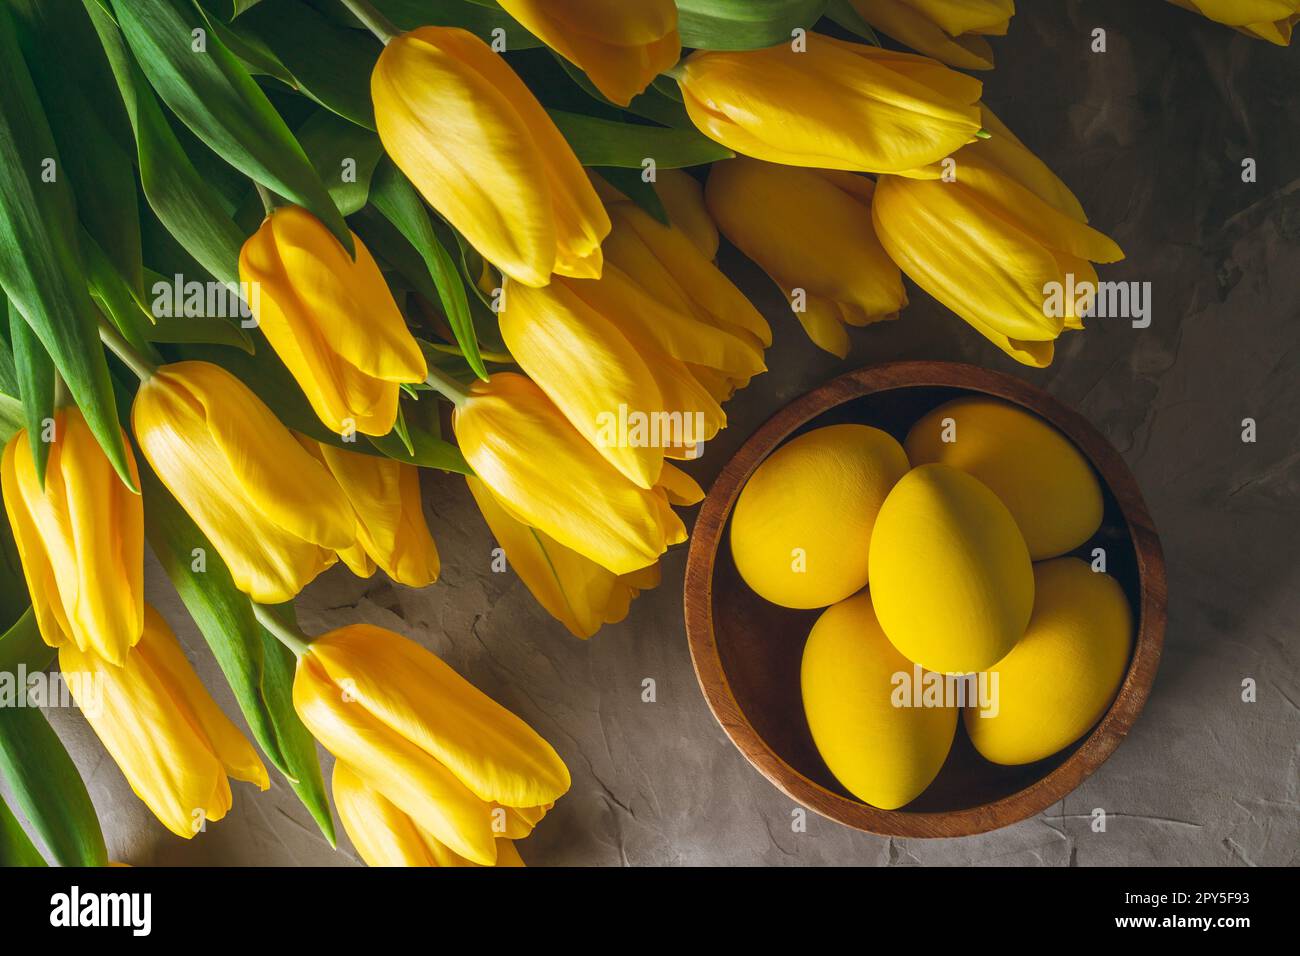 Easter eggs in wooden bowl and bouquet of bright yellow tulips on gray concrete surface. Flat lay. Top view Stock Photo